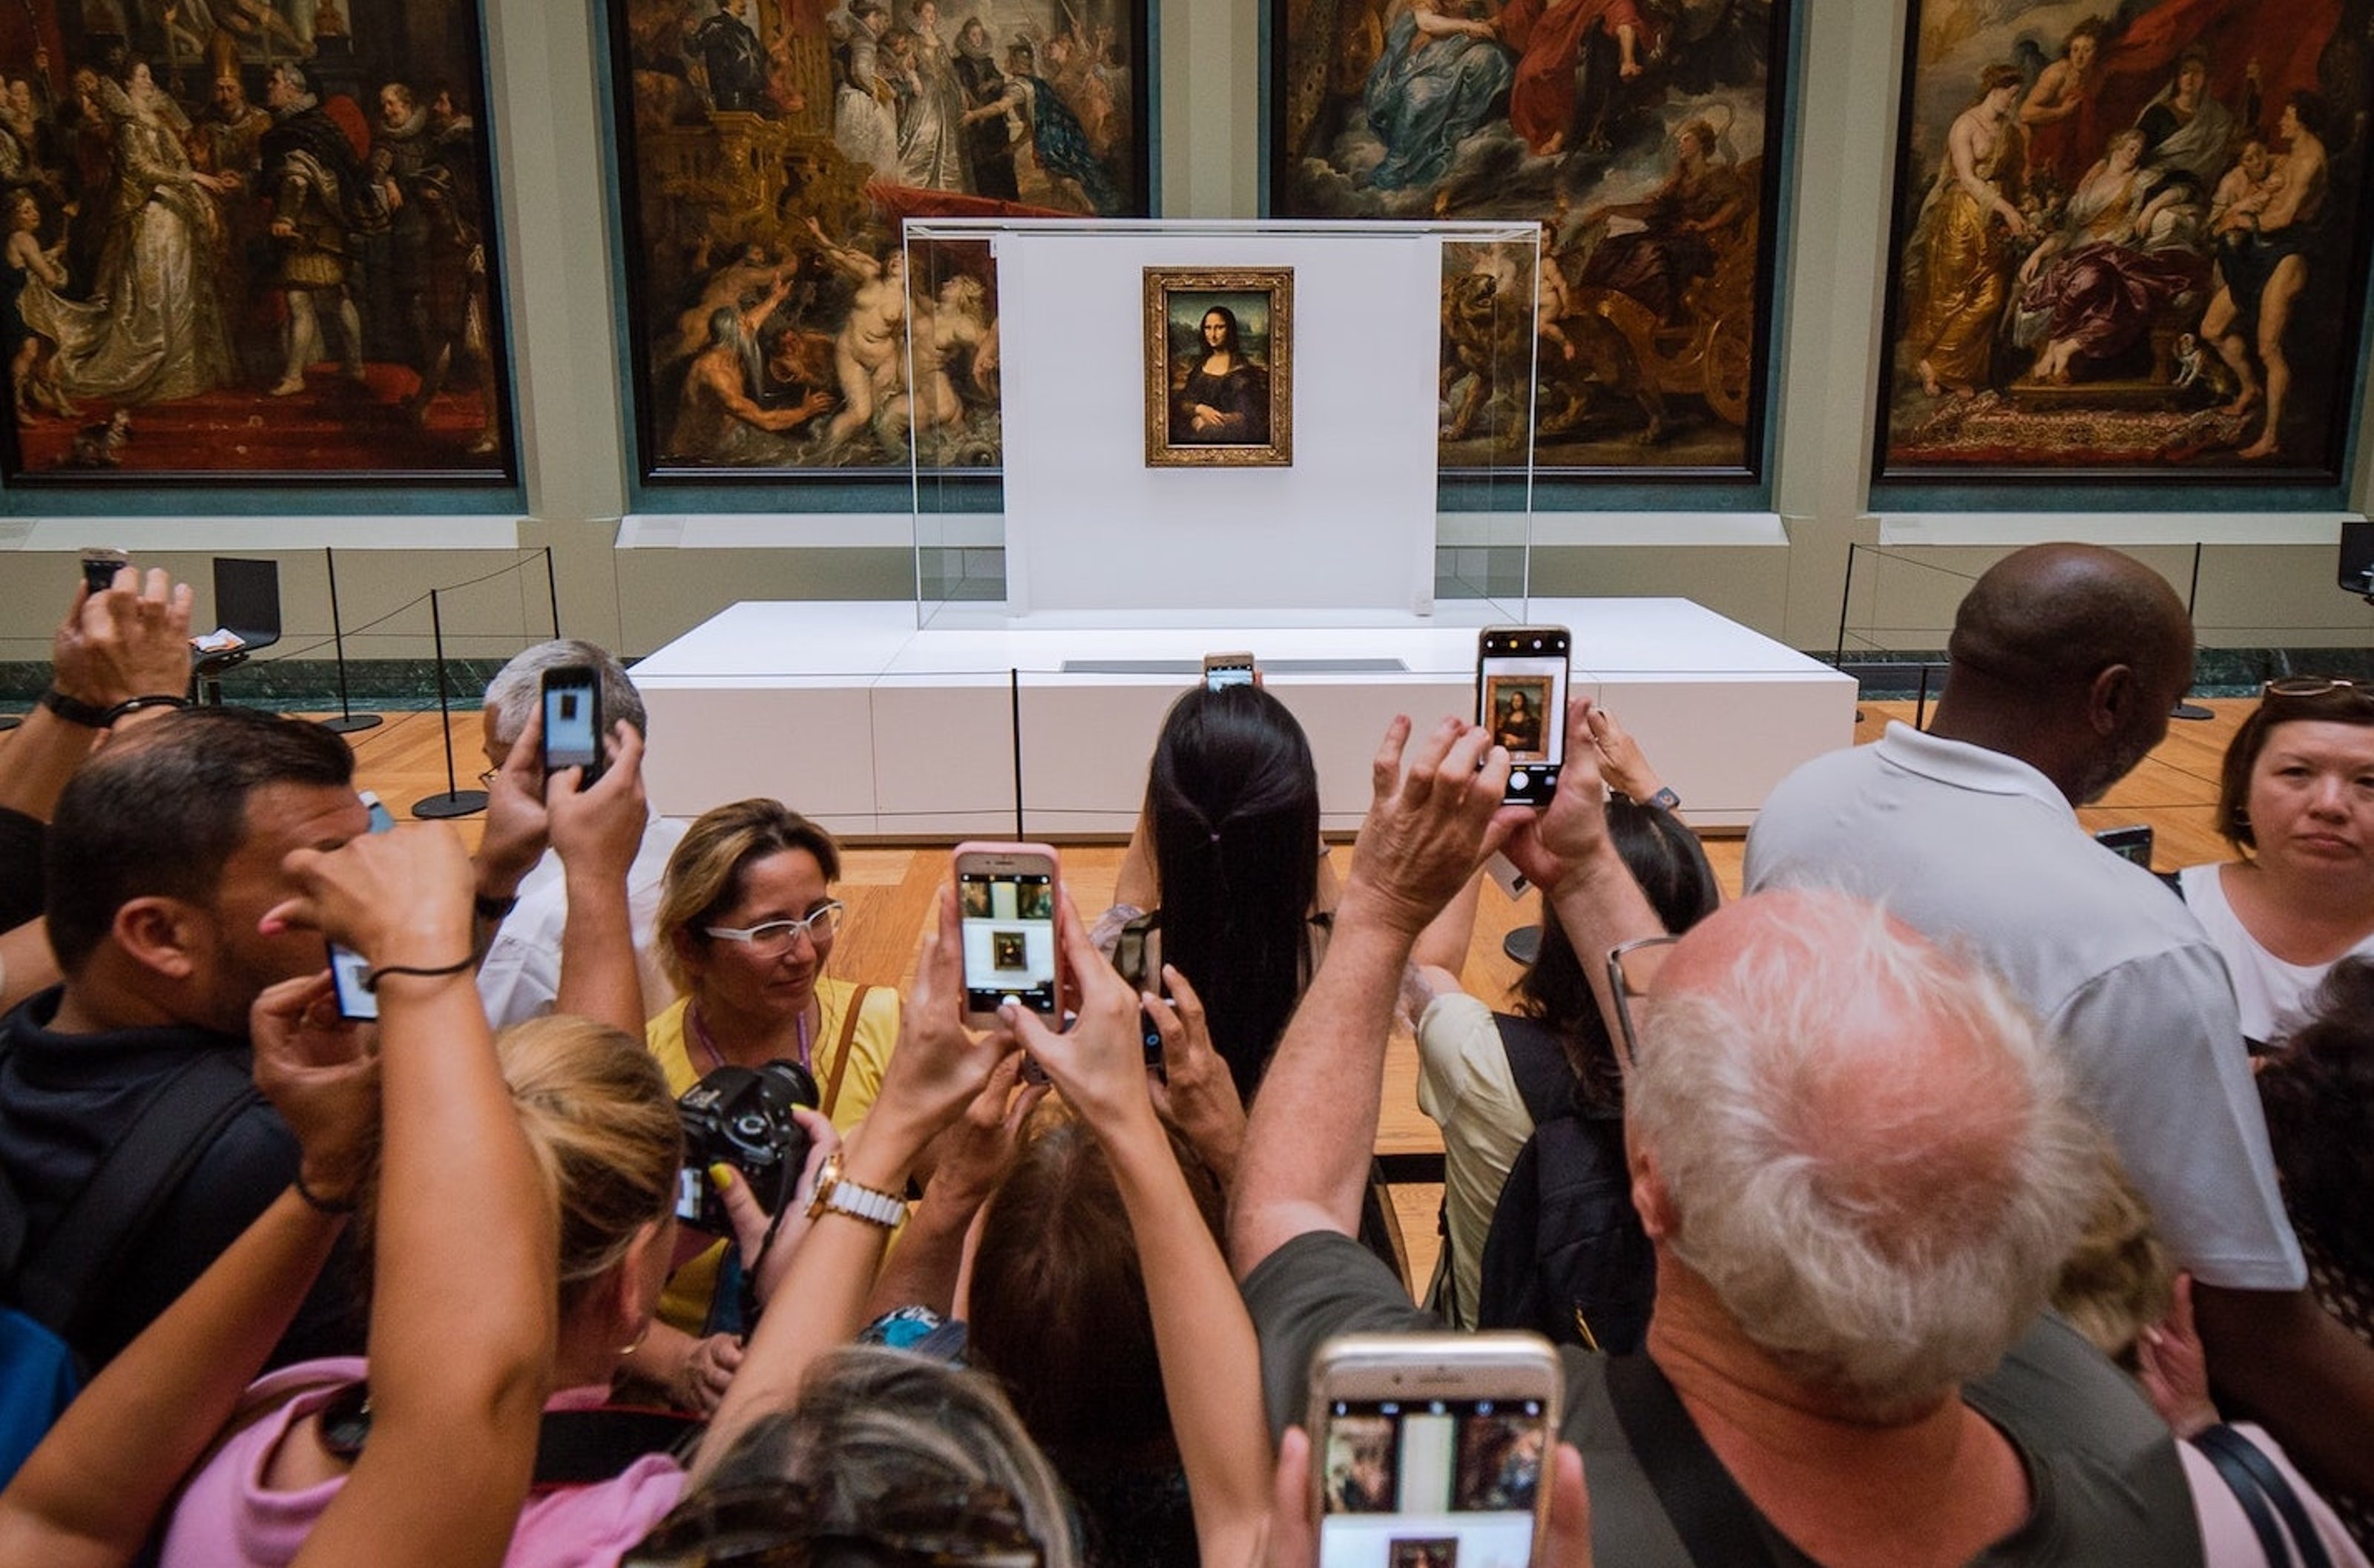 People taking photo of a painting inside the Louvre museum